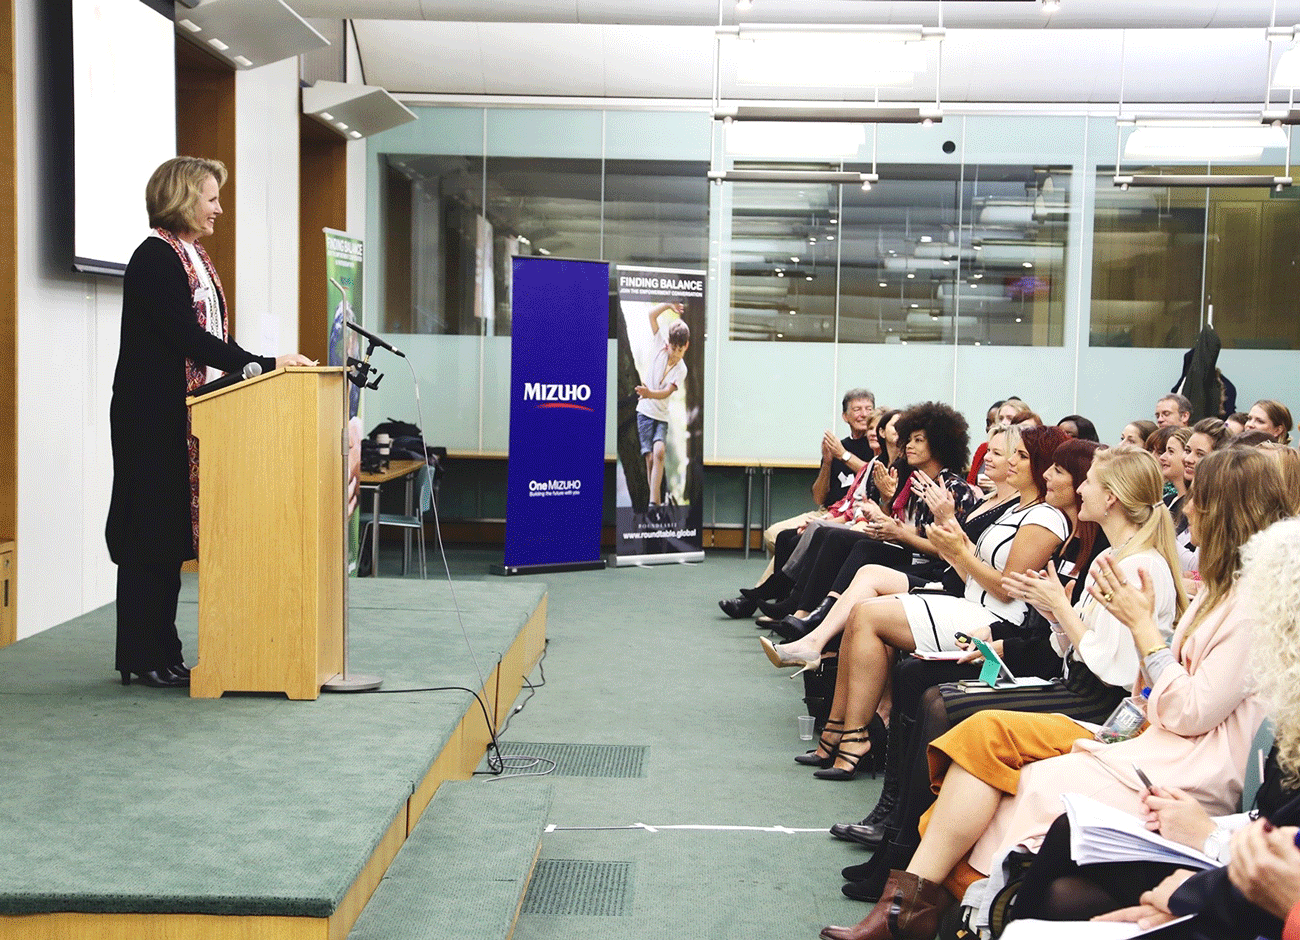 a blonde woman stands at a lectern while talking to an audience of women.